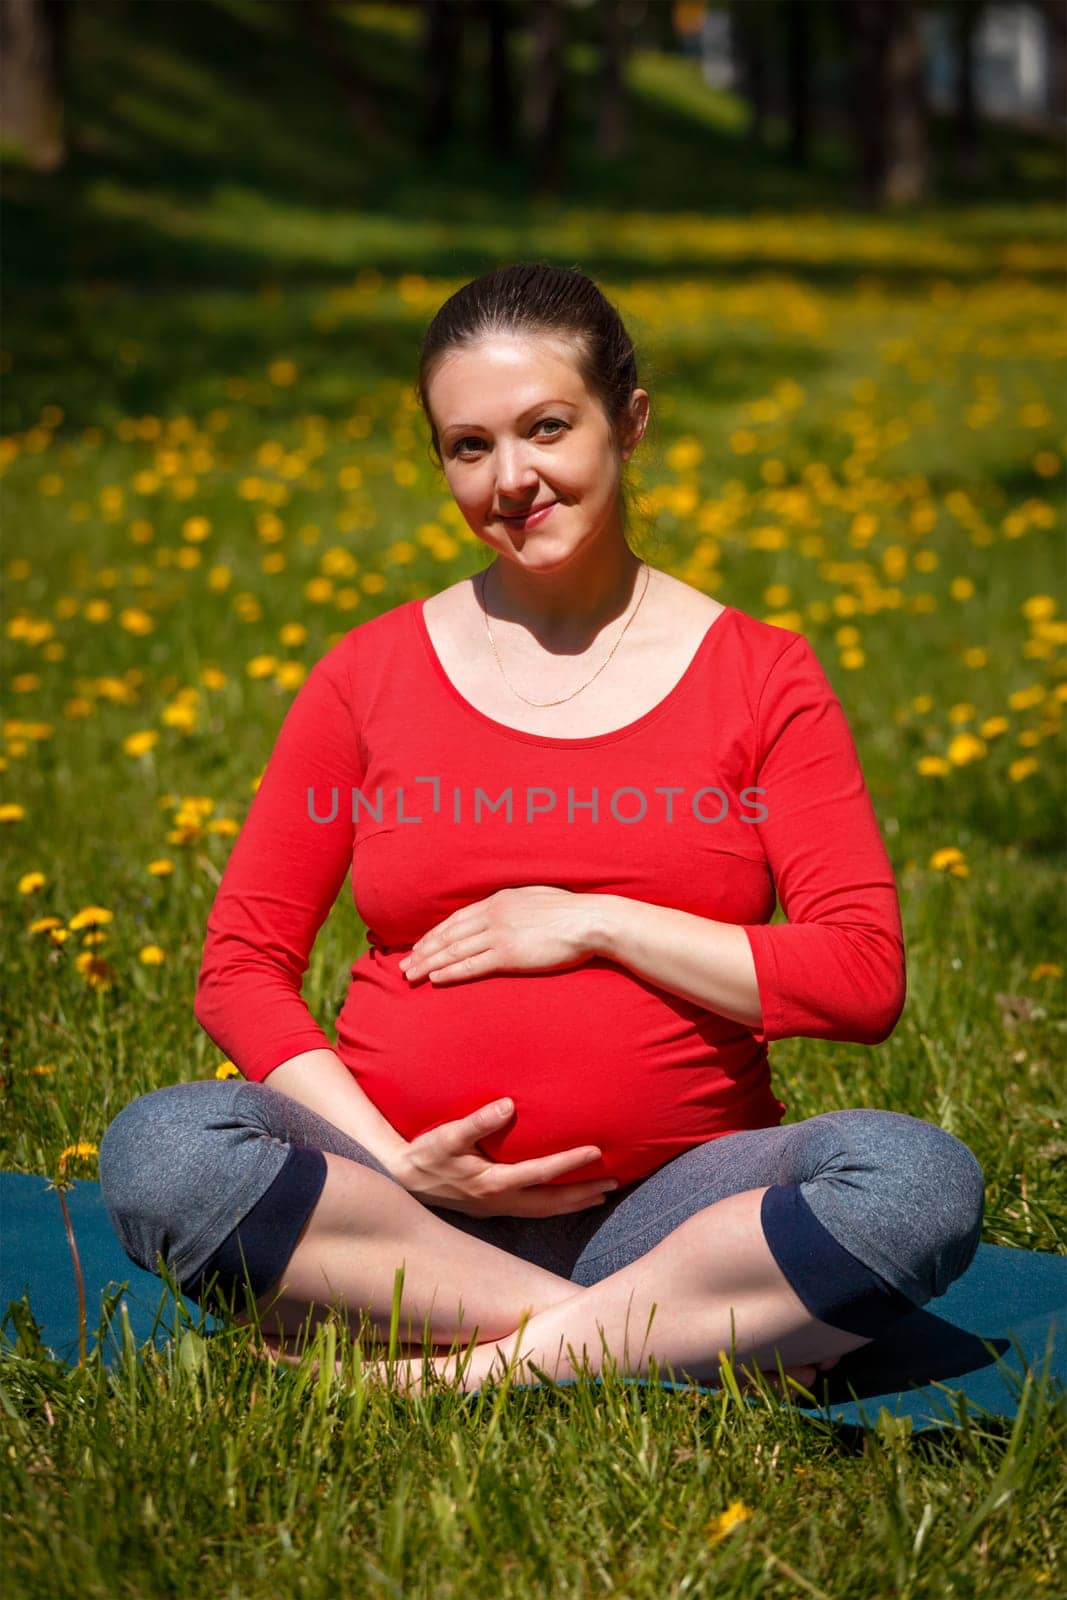 Pregnancy yoga exercise - pregnant smiling woman doing asana Sukhasana easy yoga pose holding her abdomen outdoors on grass lawn with dandelions in summer